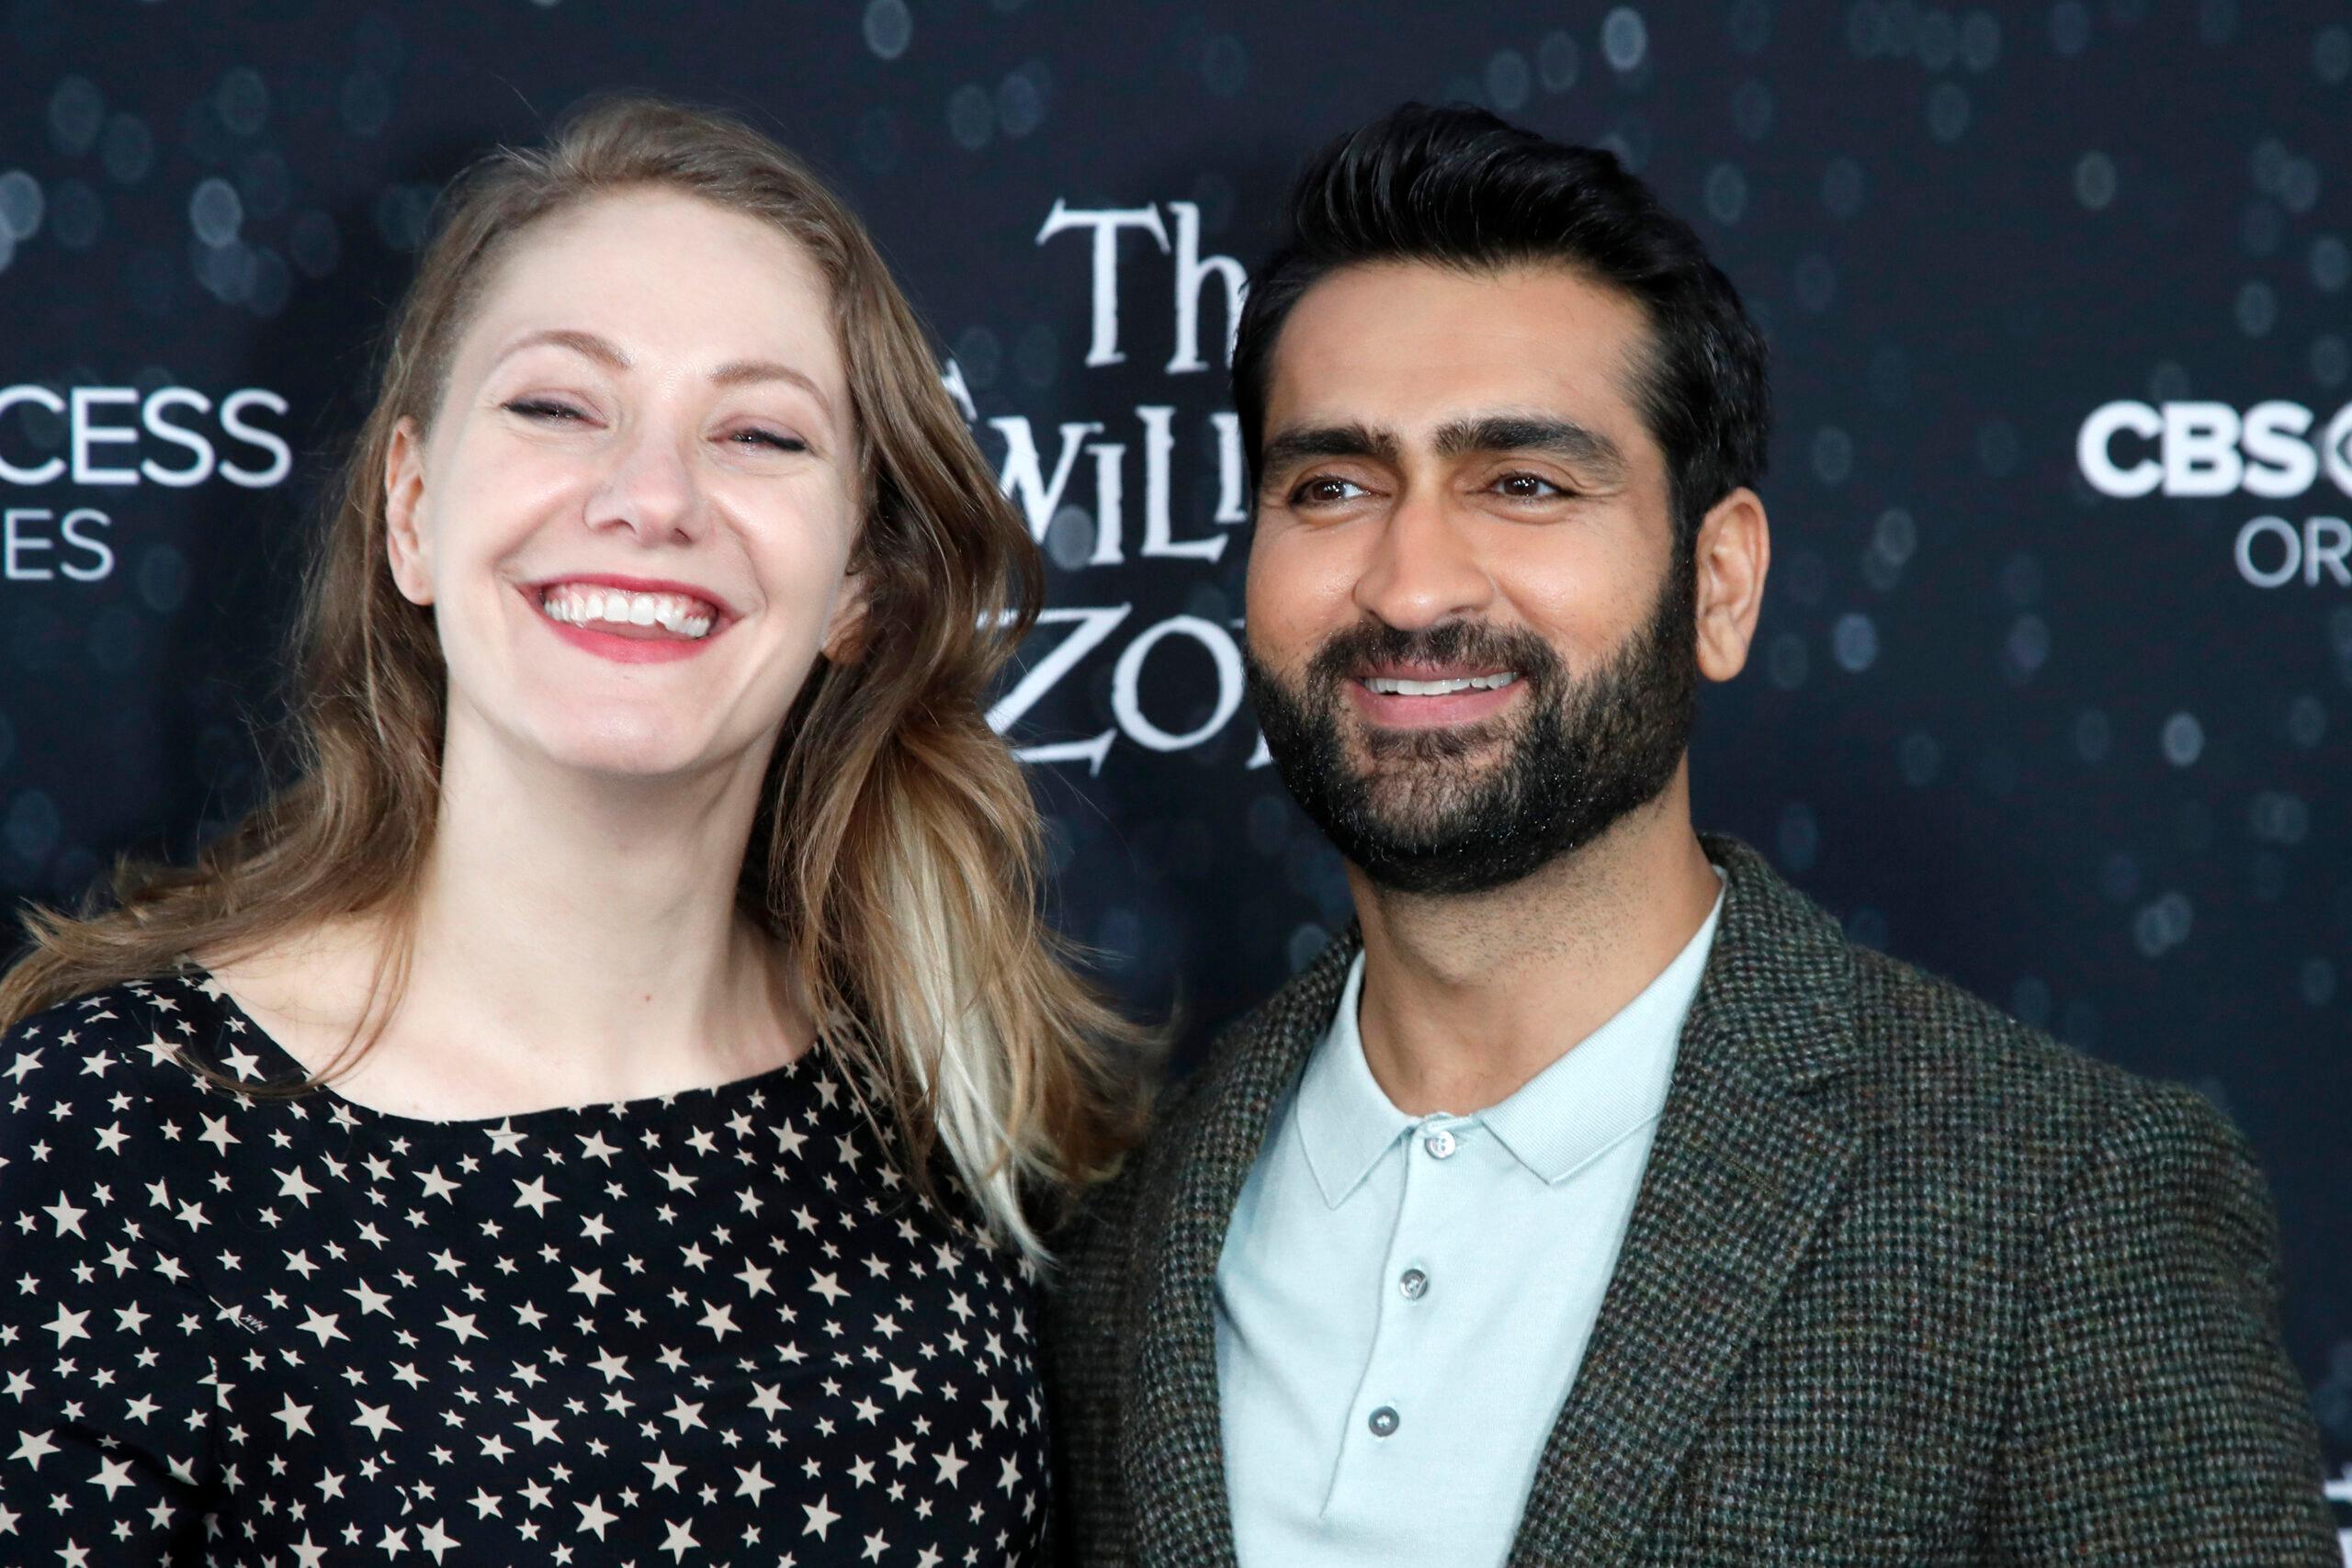 Emily V. Gordon, Kumail Nanjiani at "The Twilight Zone" Premiere at the Harmony Gold Theater on March 26, 2019 in Los Angeles, CA